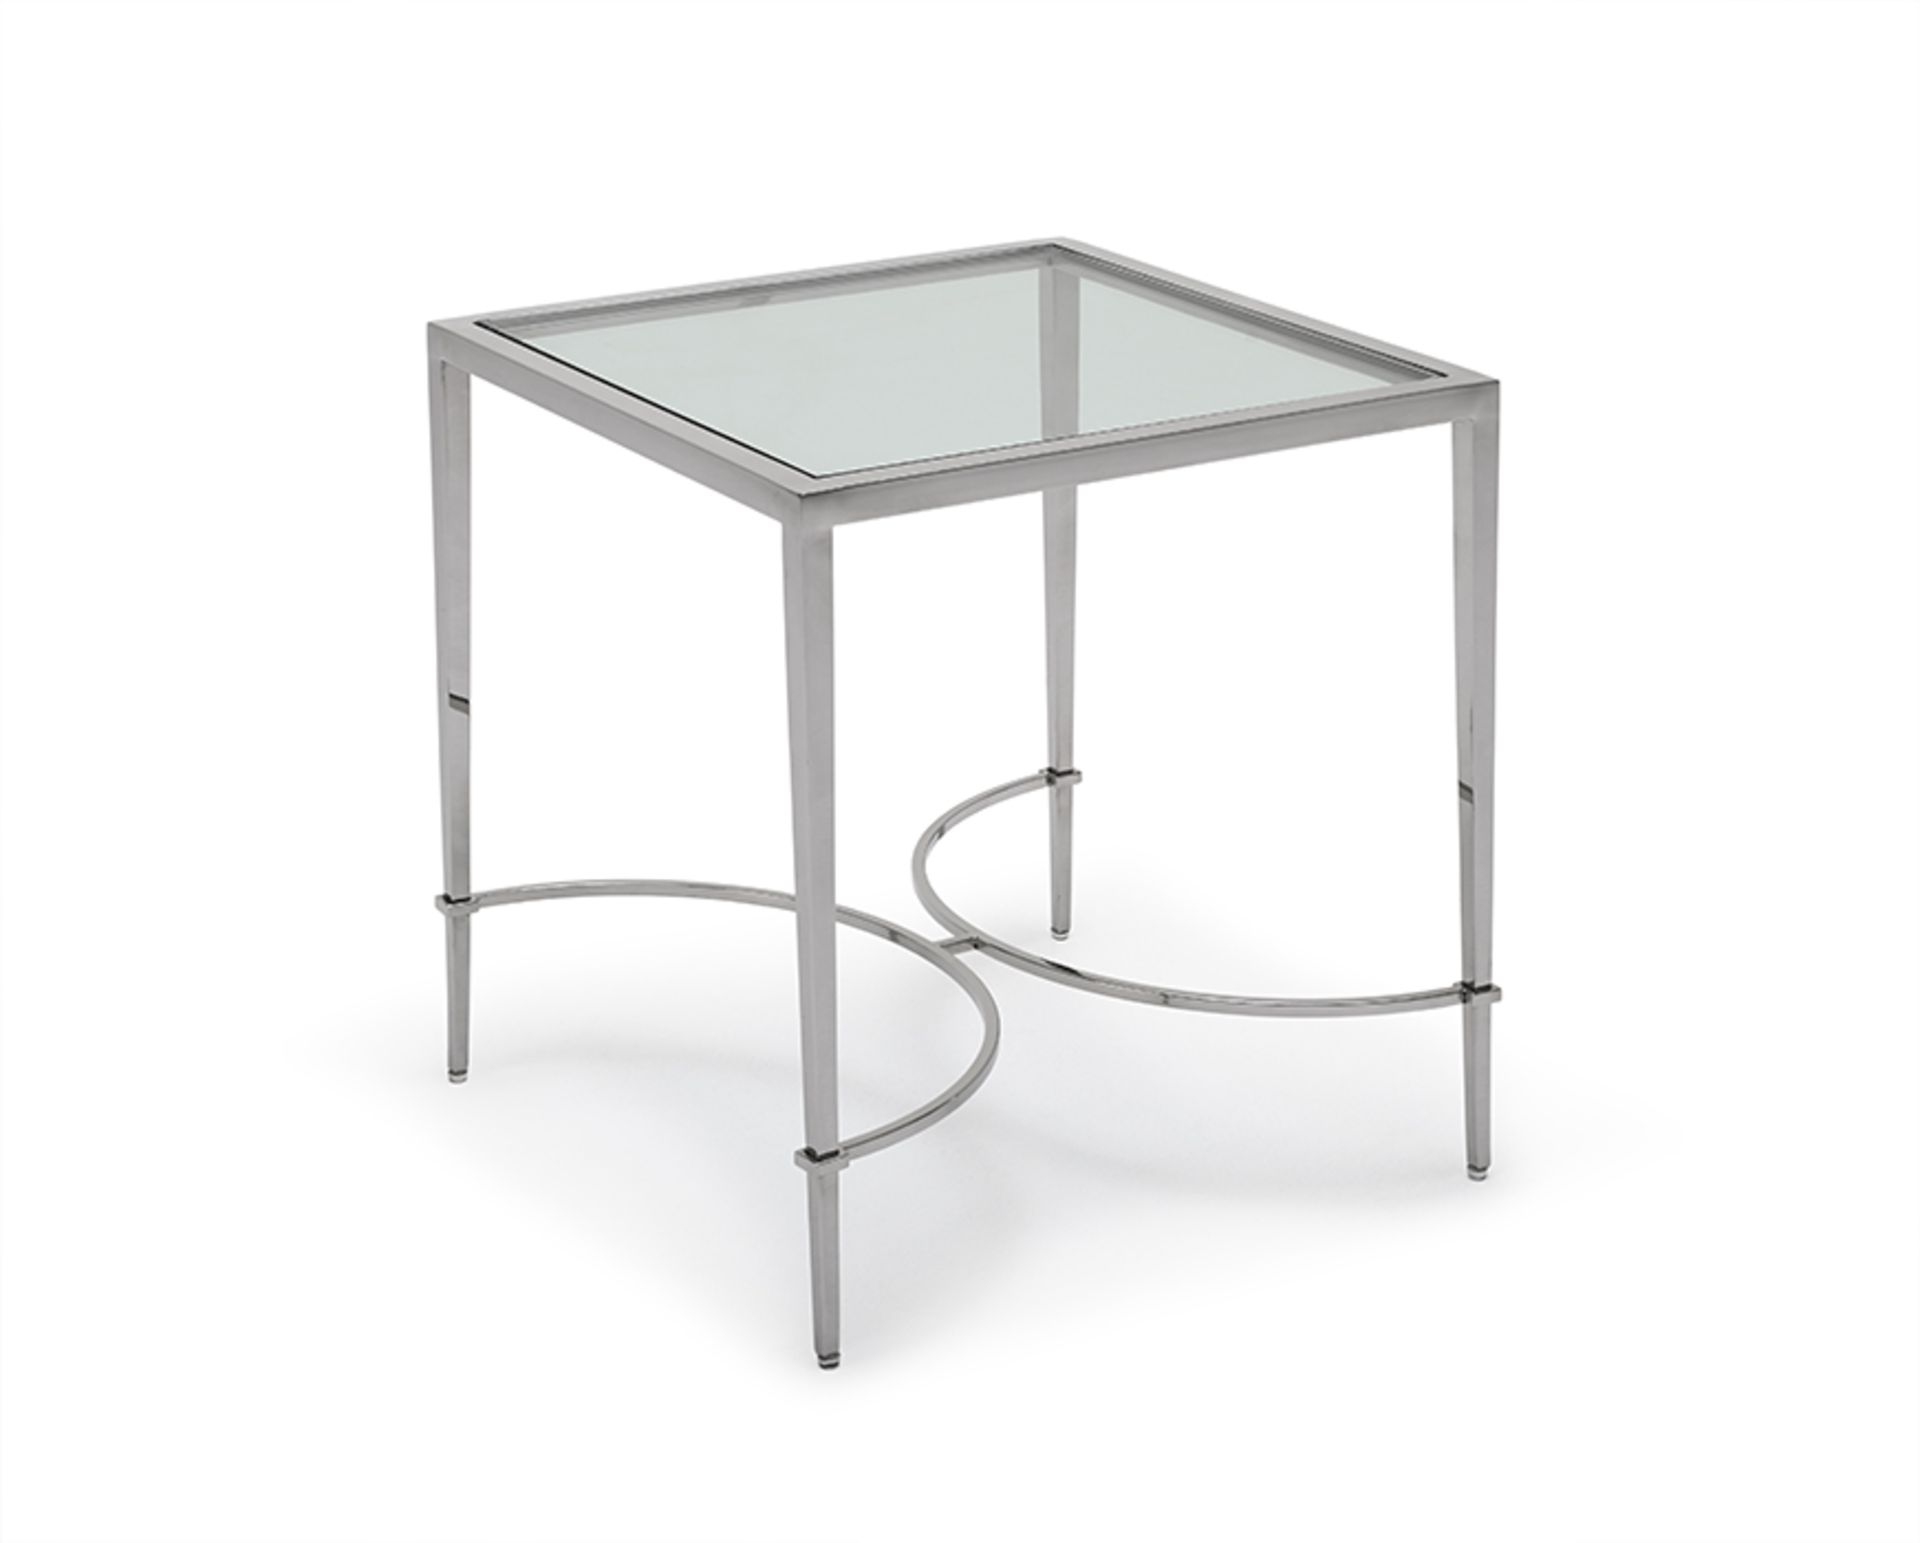 Tokyo Lamp Table by Kesterport The Tokyo lamp table with its clear glass top and a refined tapered - Image 5 of 5